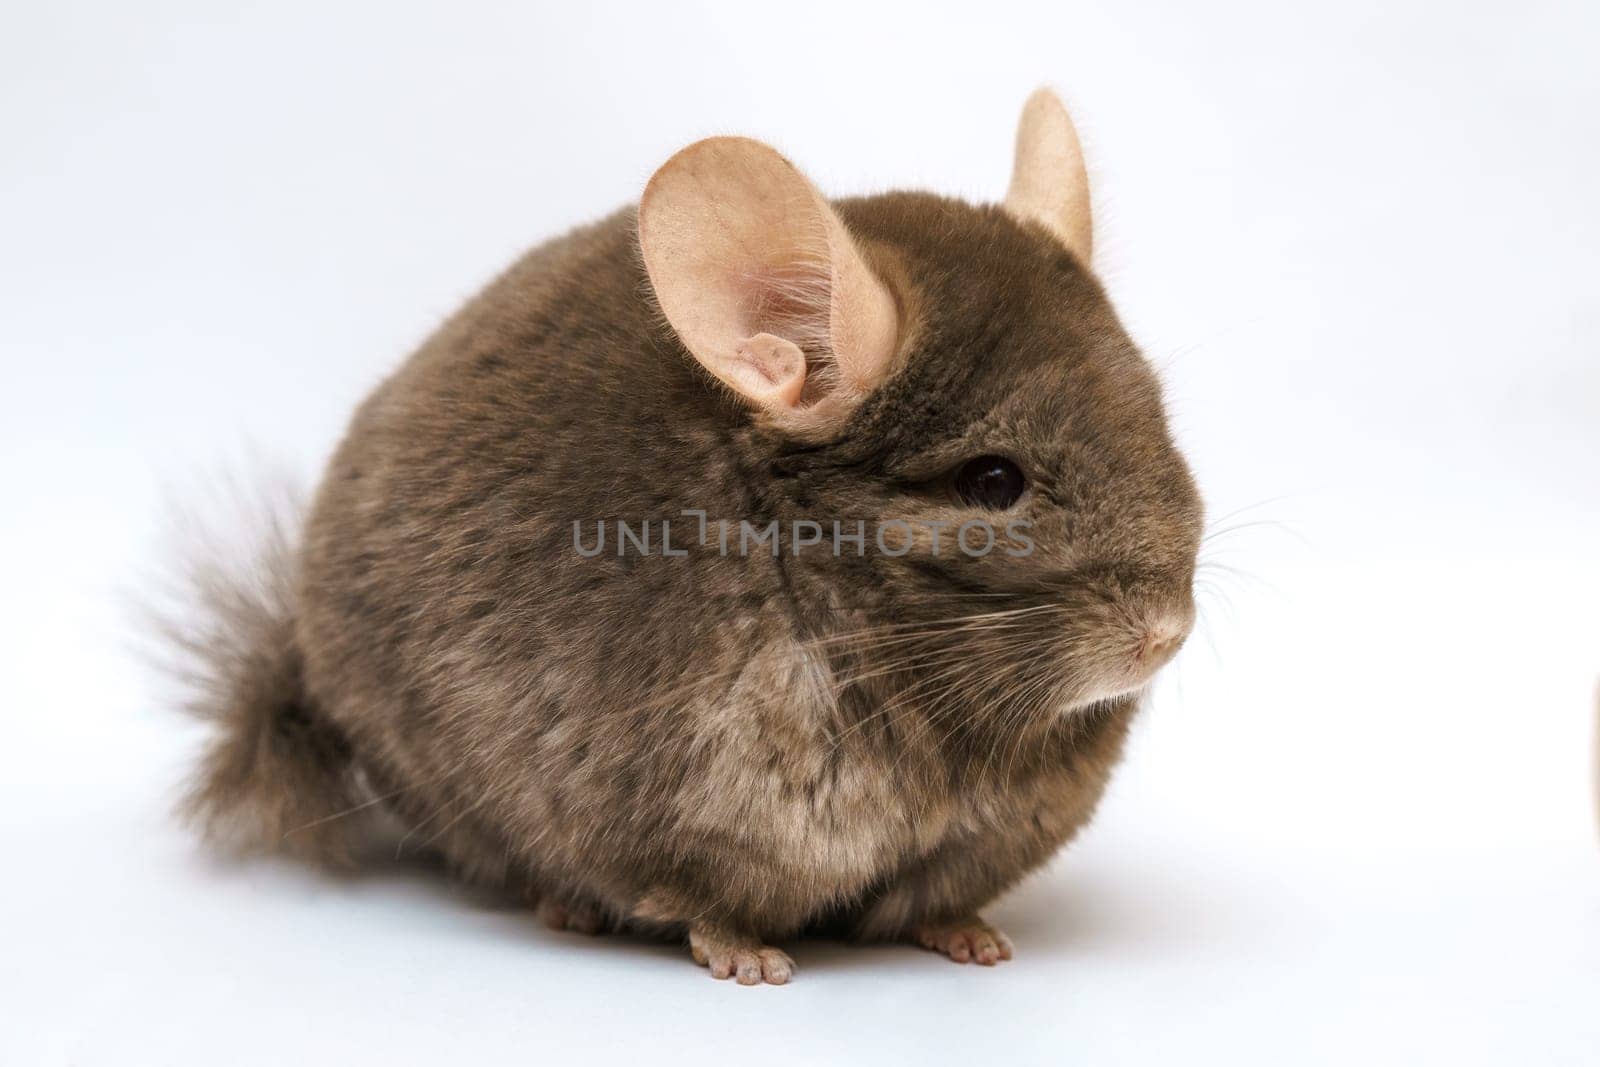 cute fluffy brown chinchilla on a white background, pet rodent animal